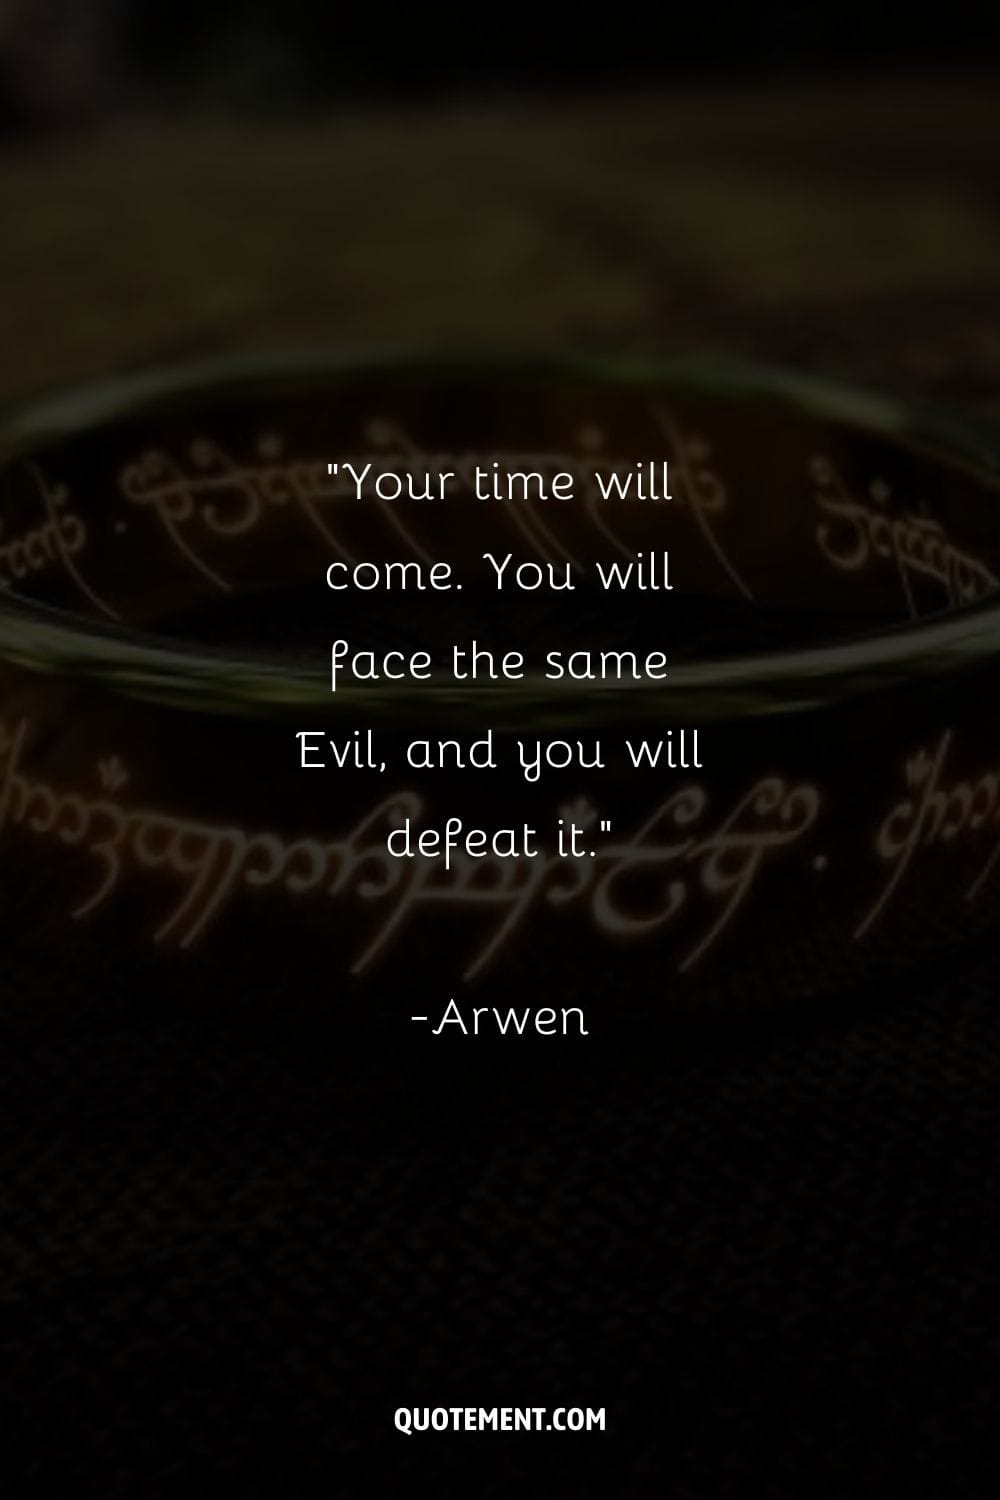 Your time will come. You will face the same Evil, and you will defeat it.